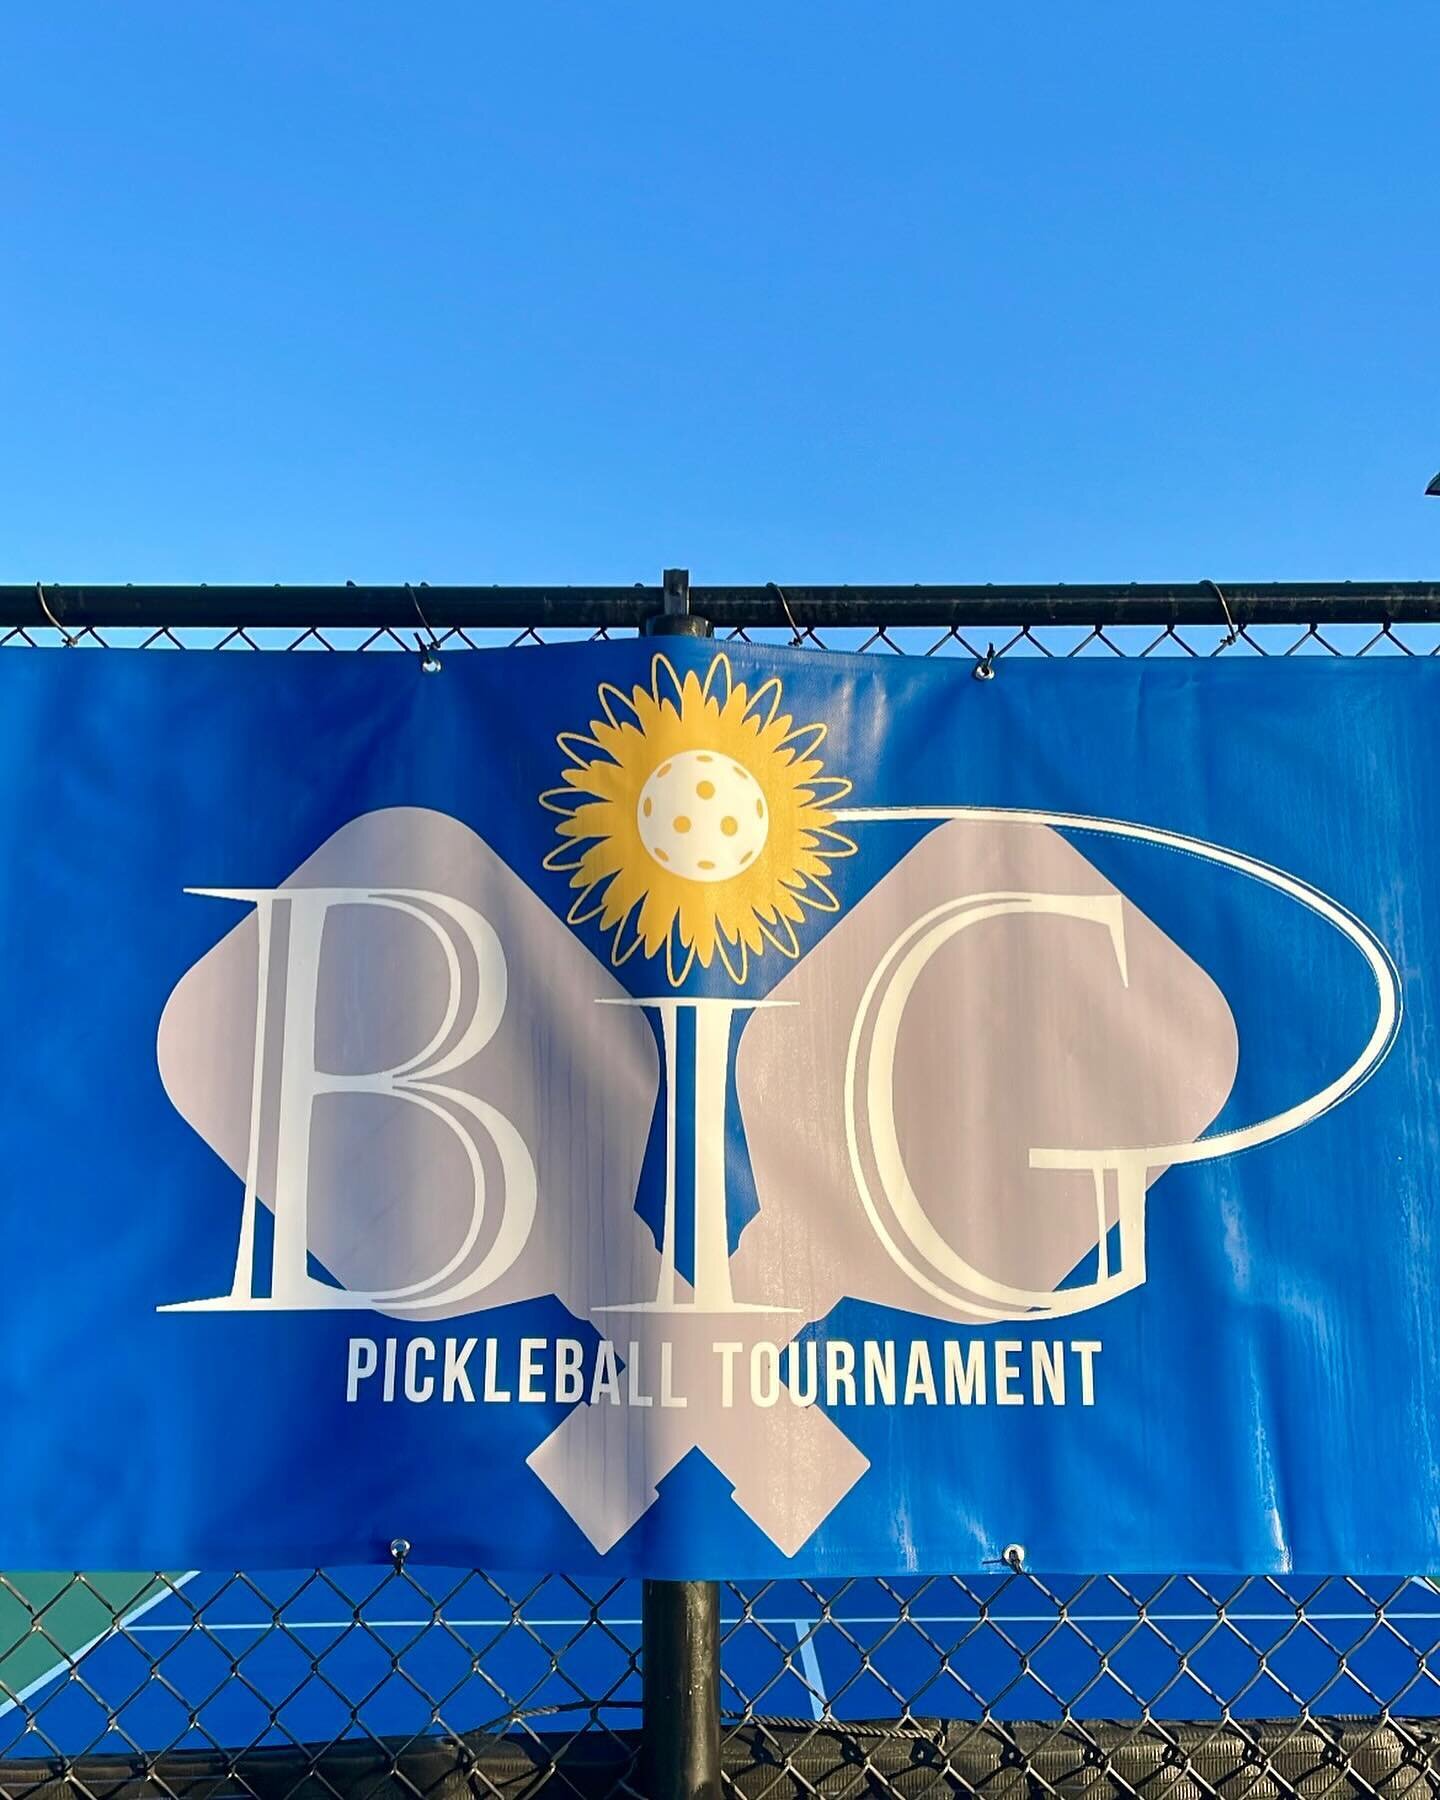 What an AMAZING day at Sun City for BiG&rsquo;s first annual Pickleball Tournament last Saturday! We want to extend a heartfelt thank you to everyone who joined us - players, spectators, and supporters alike! Your contribution played a pivotal role i